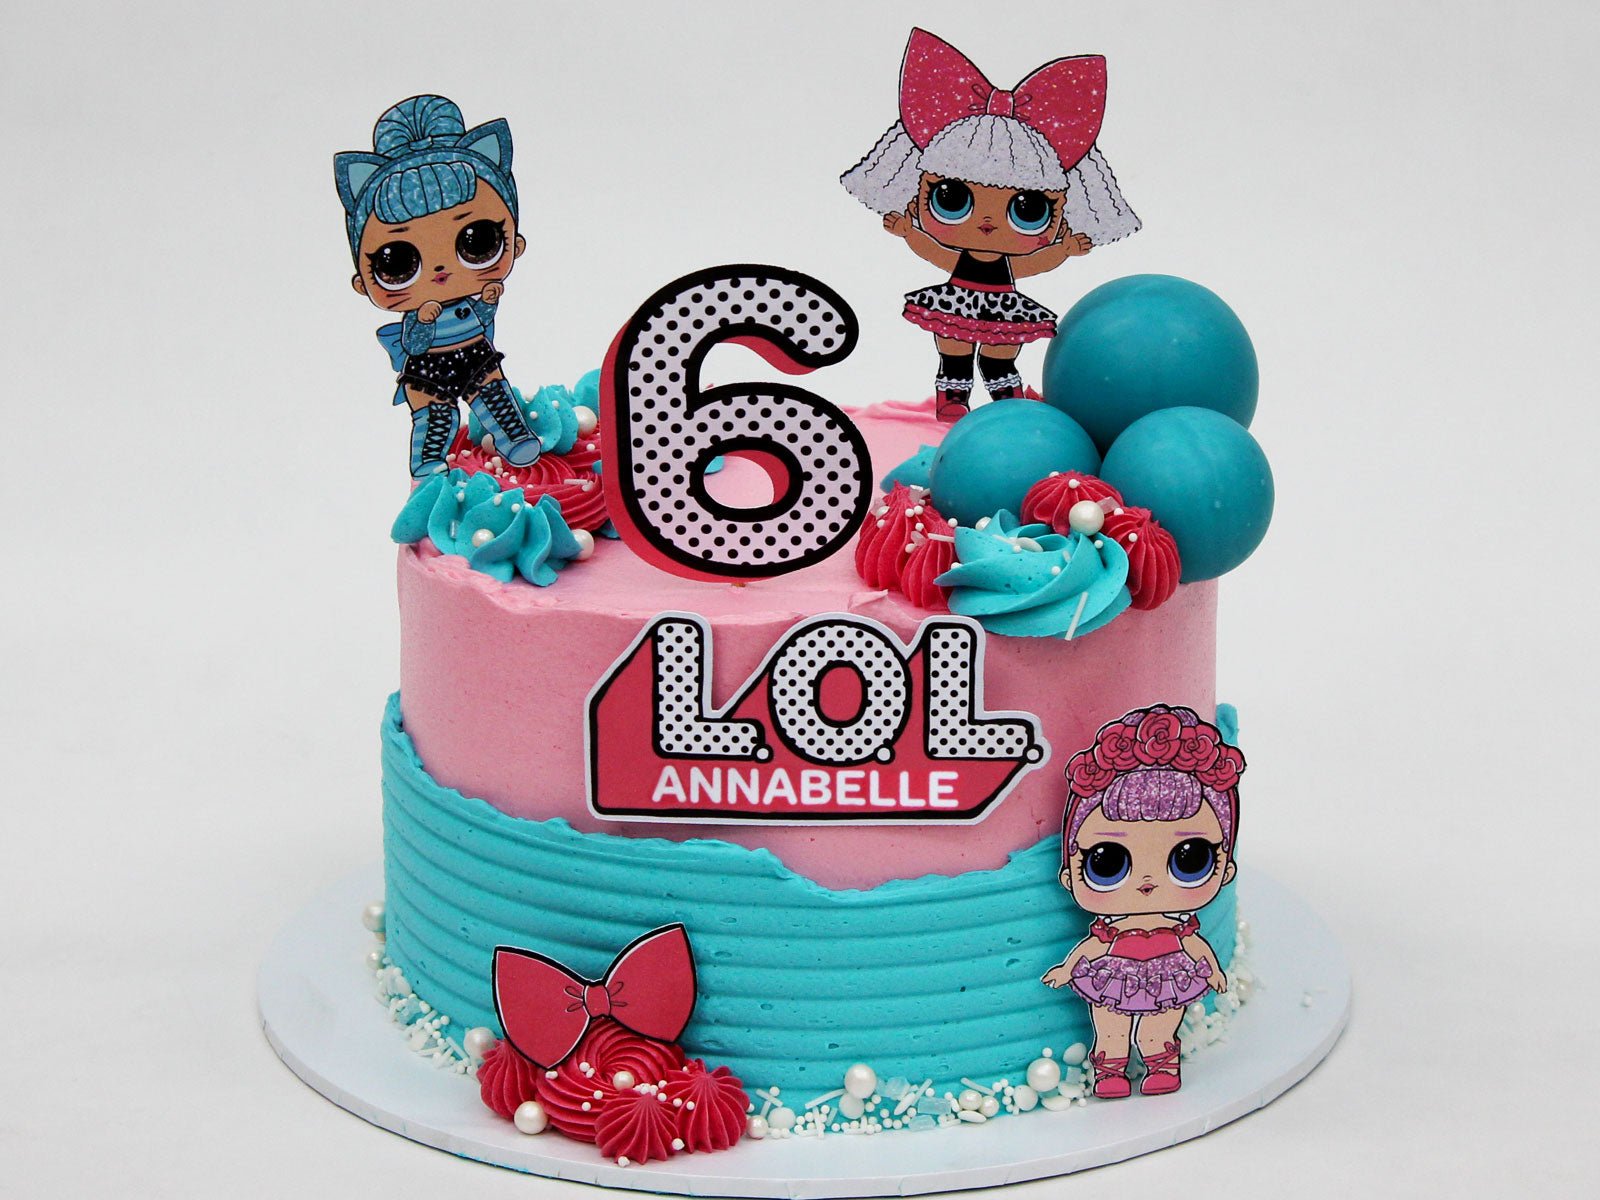 L.O.L Surprise! Themed Cake in 2023 | Funny birthday cakes, Surprise  birthday cake, Doll birthday cake